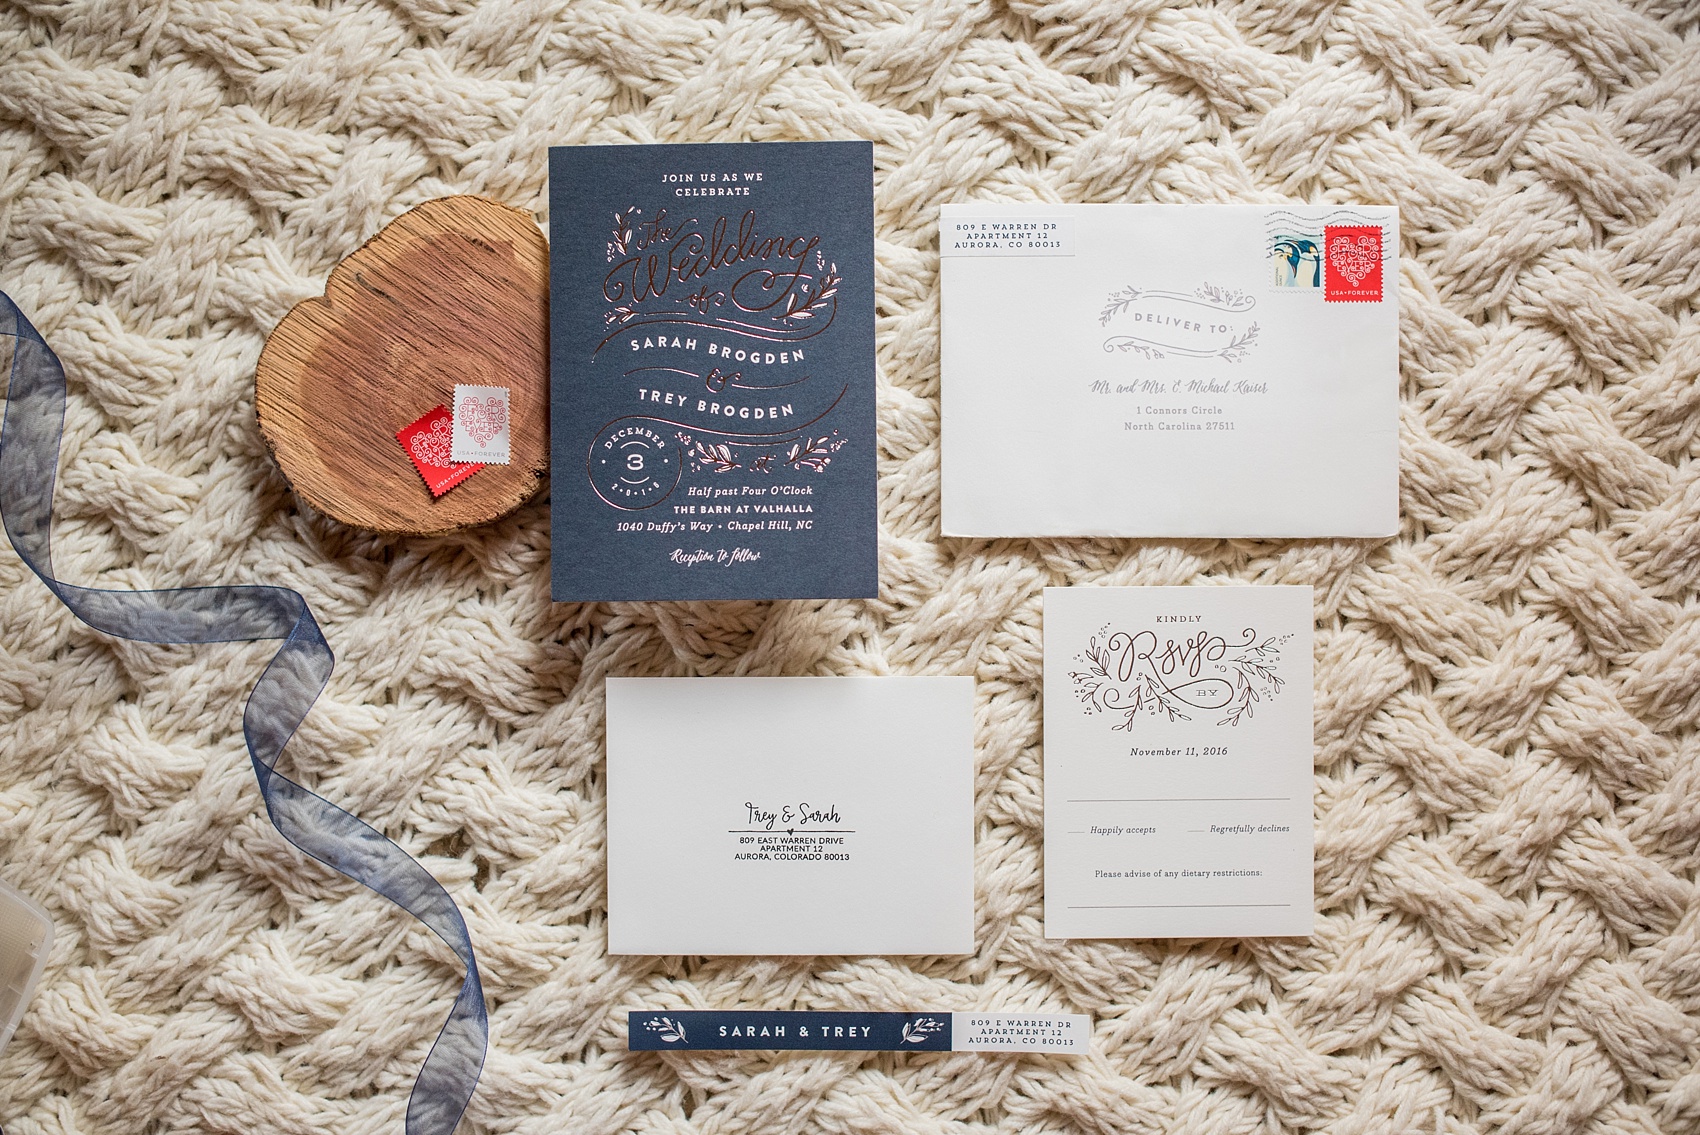 Mikkel Paige Photography photos of a wedding at The Barn at Valahalla in Chapel Hill, NC. Their fall wedding invitation was navy with silver foil.